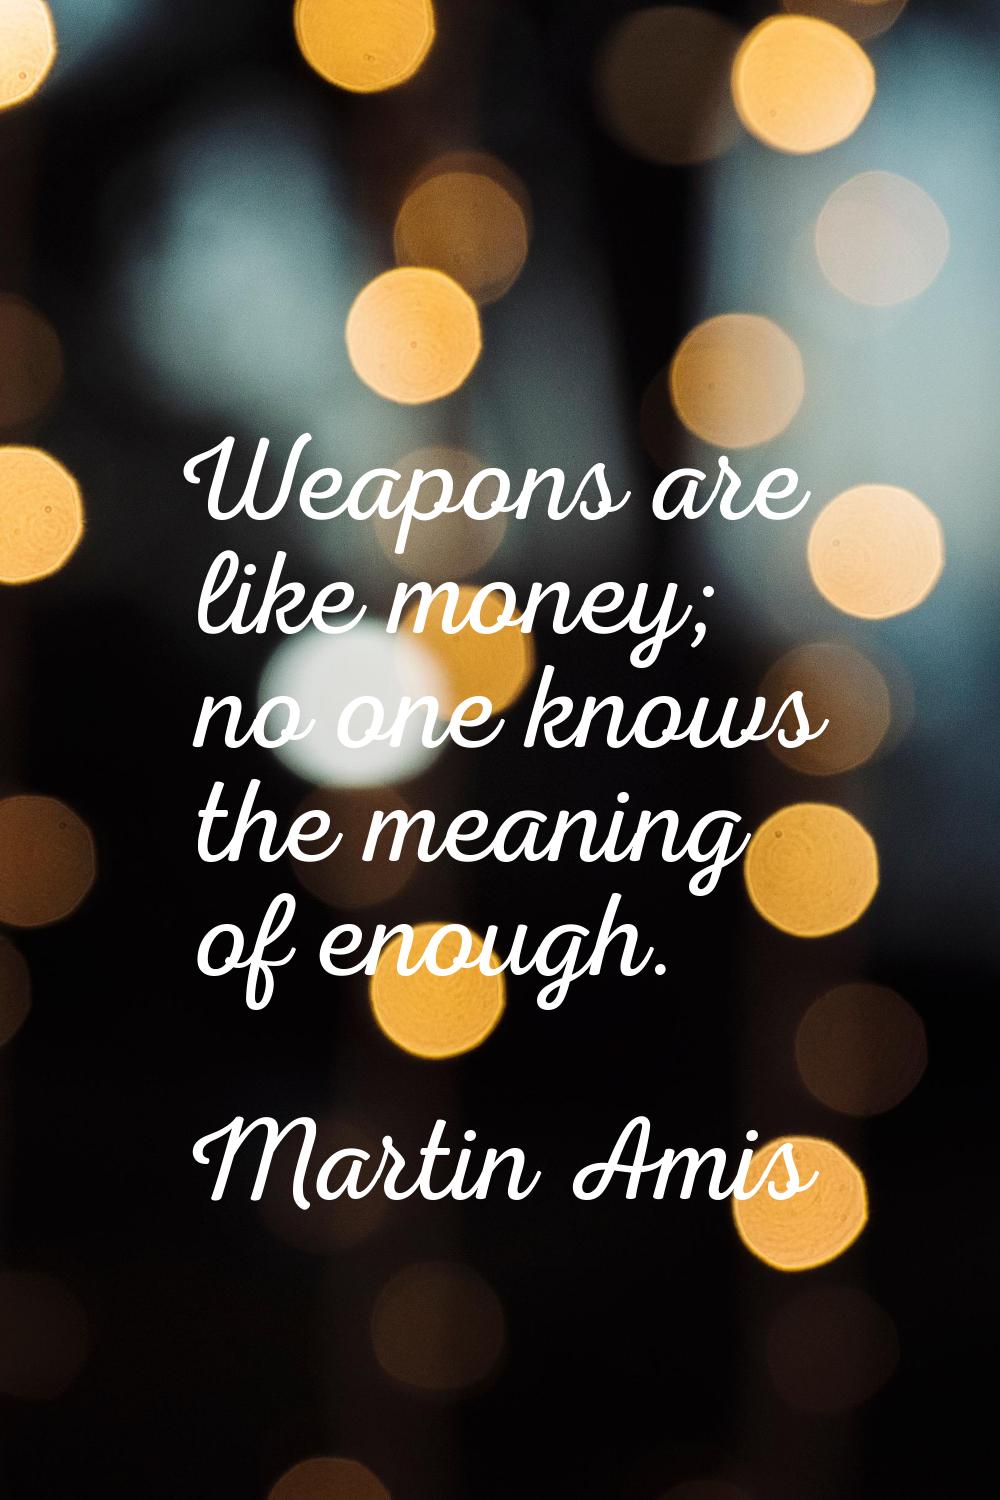 Weapons are like money; no one knows the meaning of enough.